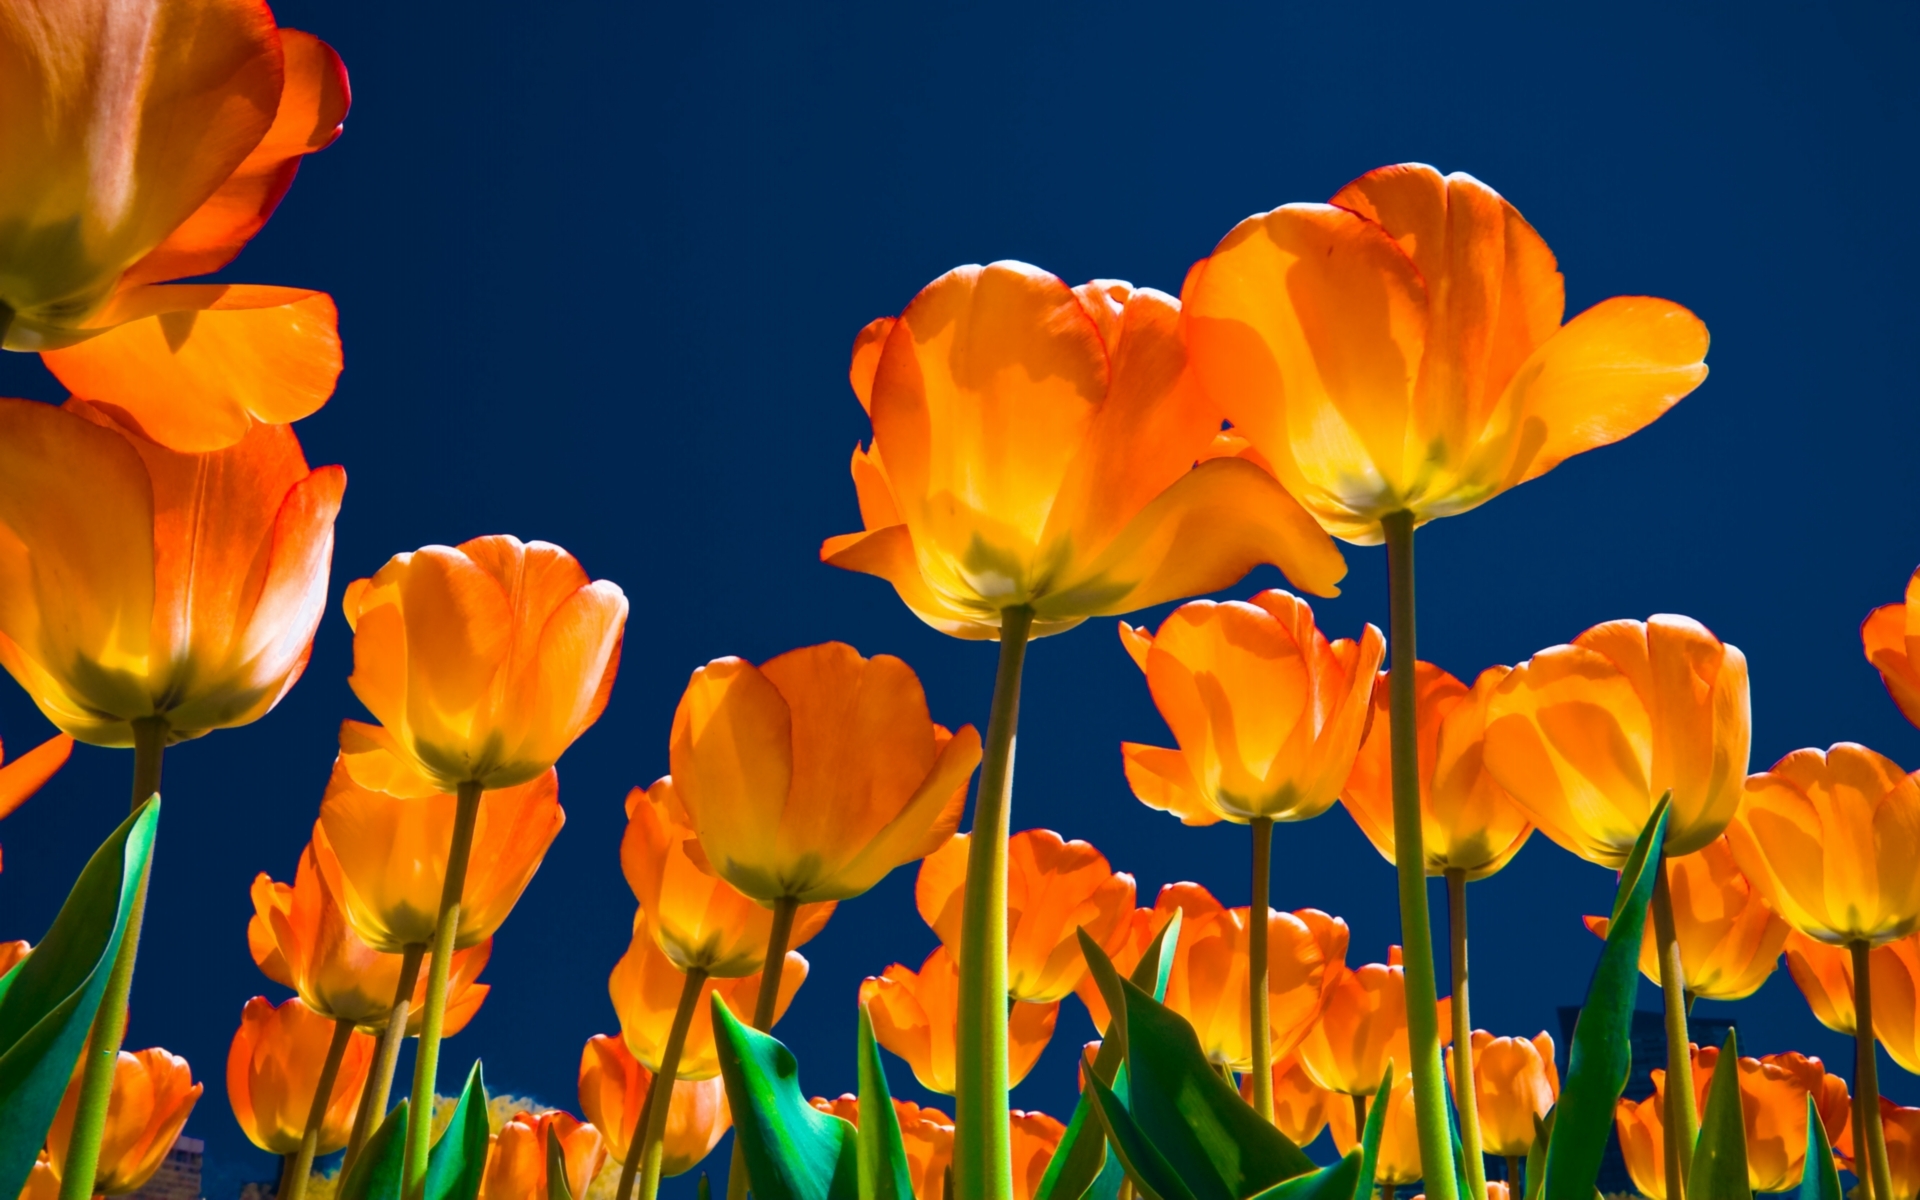 Wallpaper Yellow Tulips in Bloom During Daytime, Background Free Image